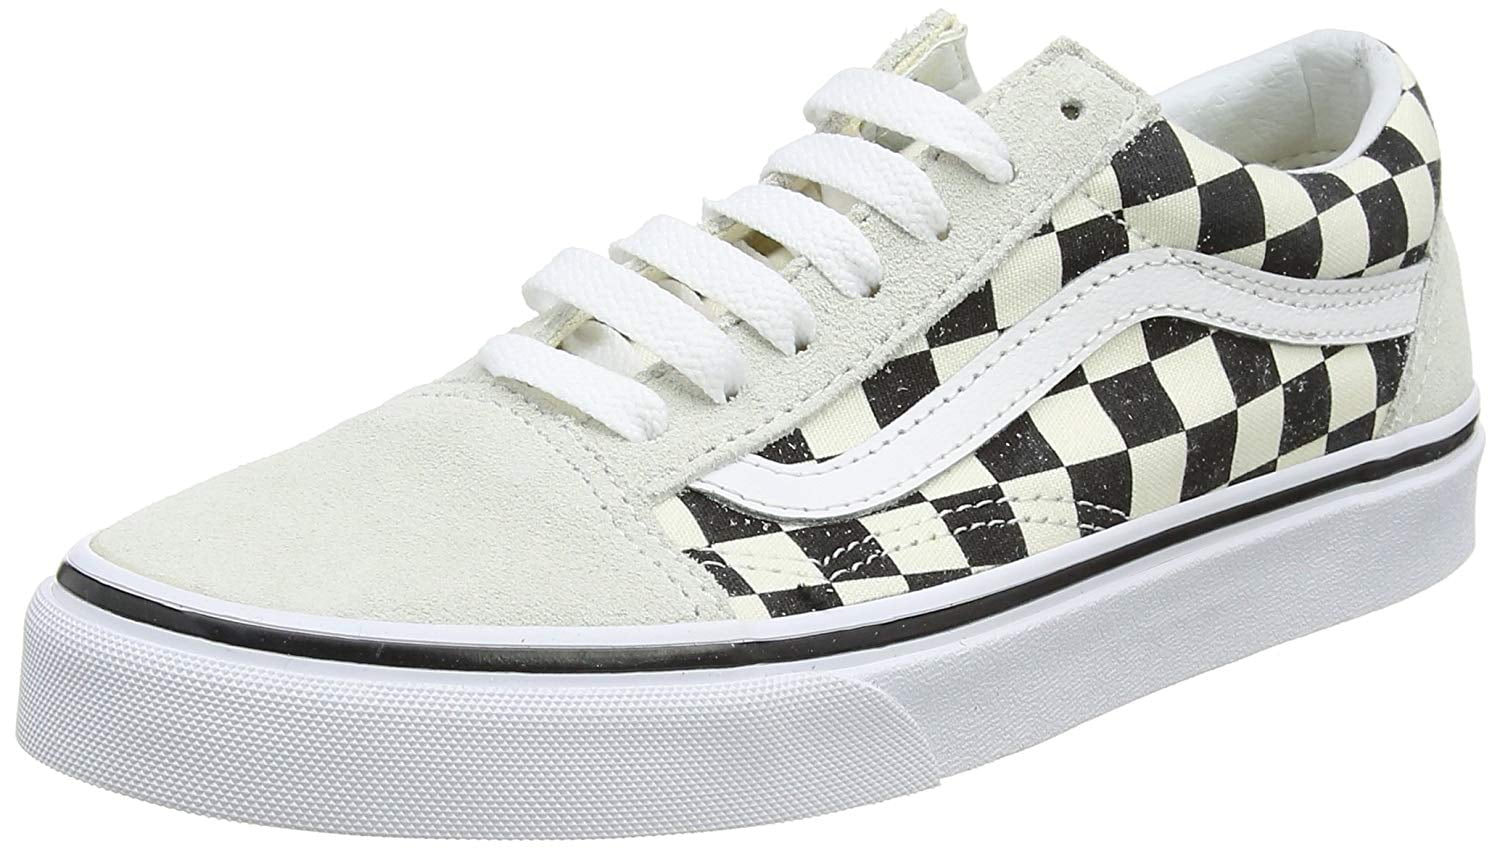 Womens Old Skool Trainers Lace Up Sneakers Ladies Canvas Stripe Shoes Pumps Size 